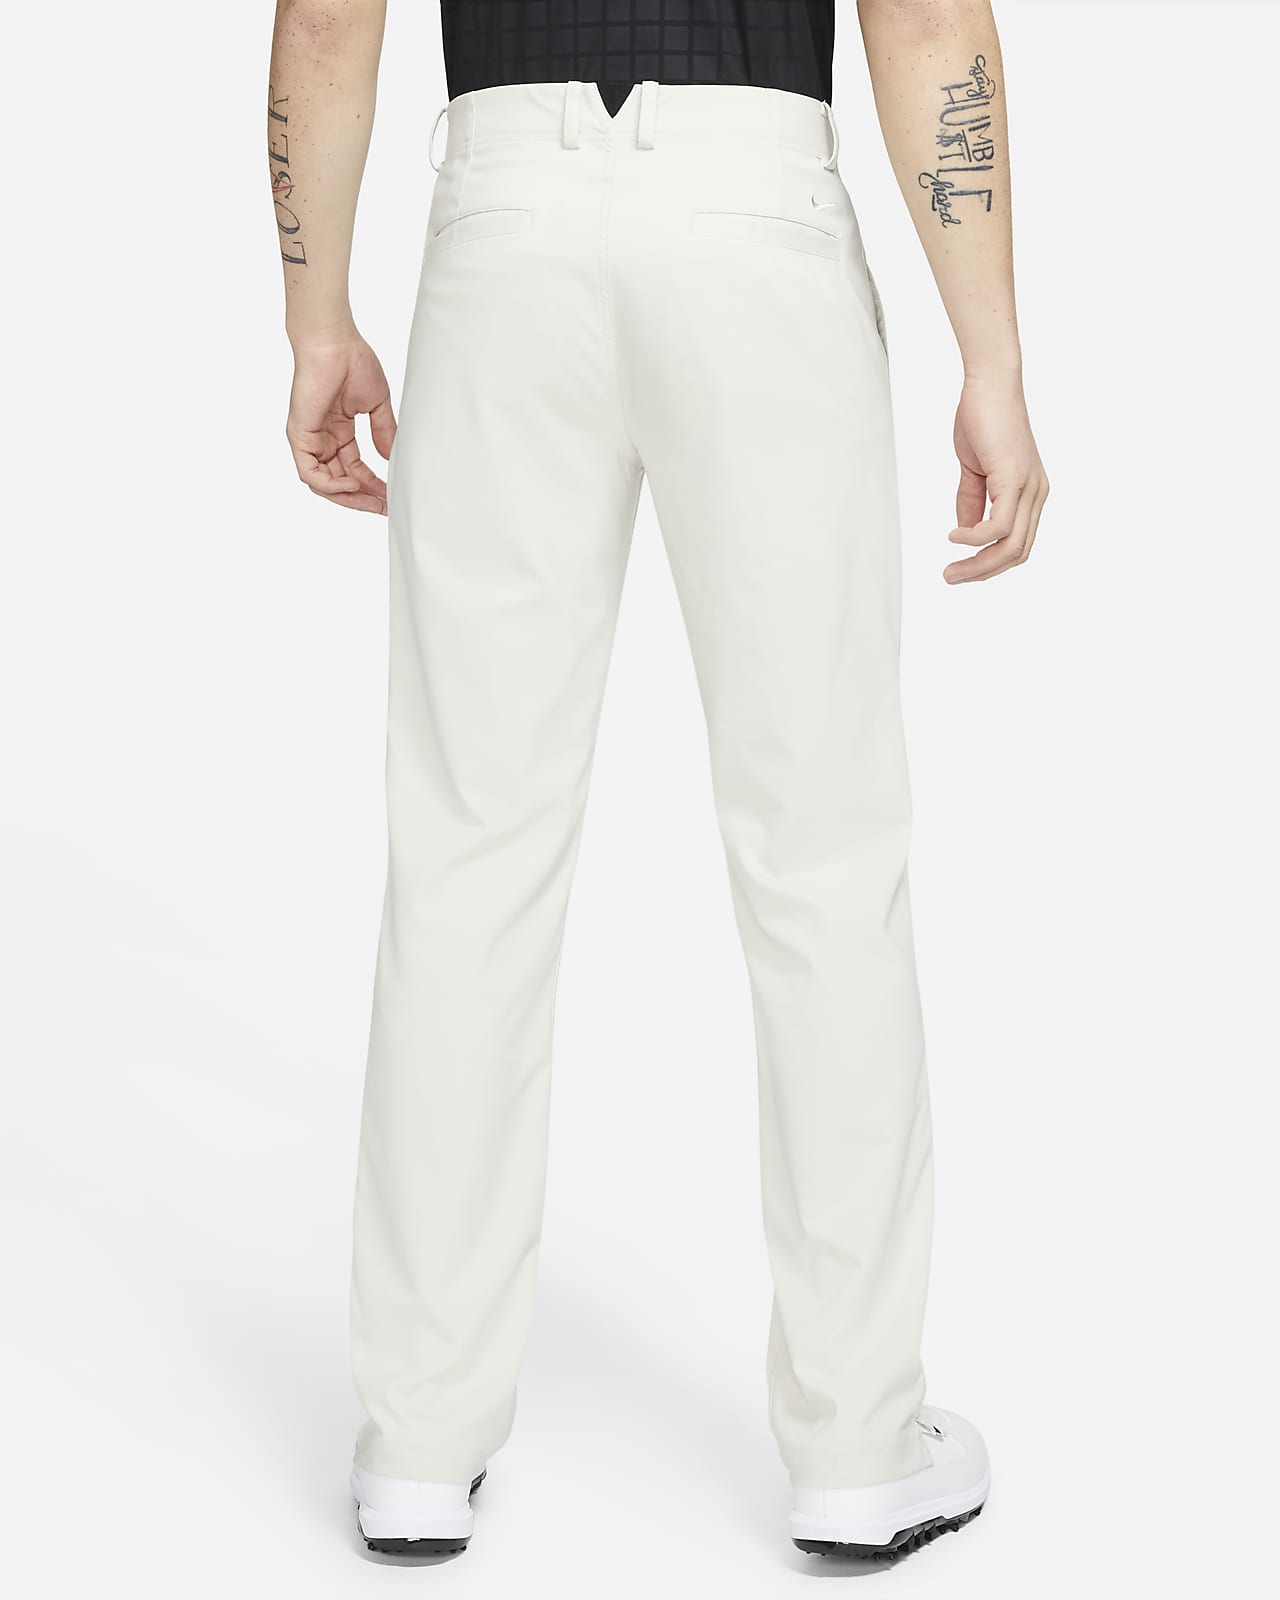 https://static.nike.com/a/images/t_PDP_1280_v1/f_auto,q_auto:eco/7c32d787-f9c3-4d03-abd6-8d87d5b99a25/flex-golf-trousers-HNjnWt.png